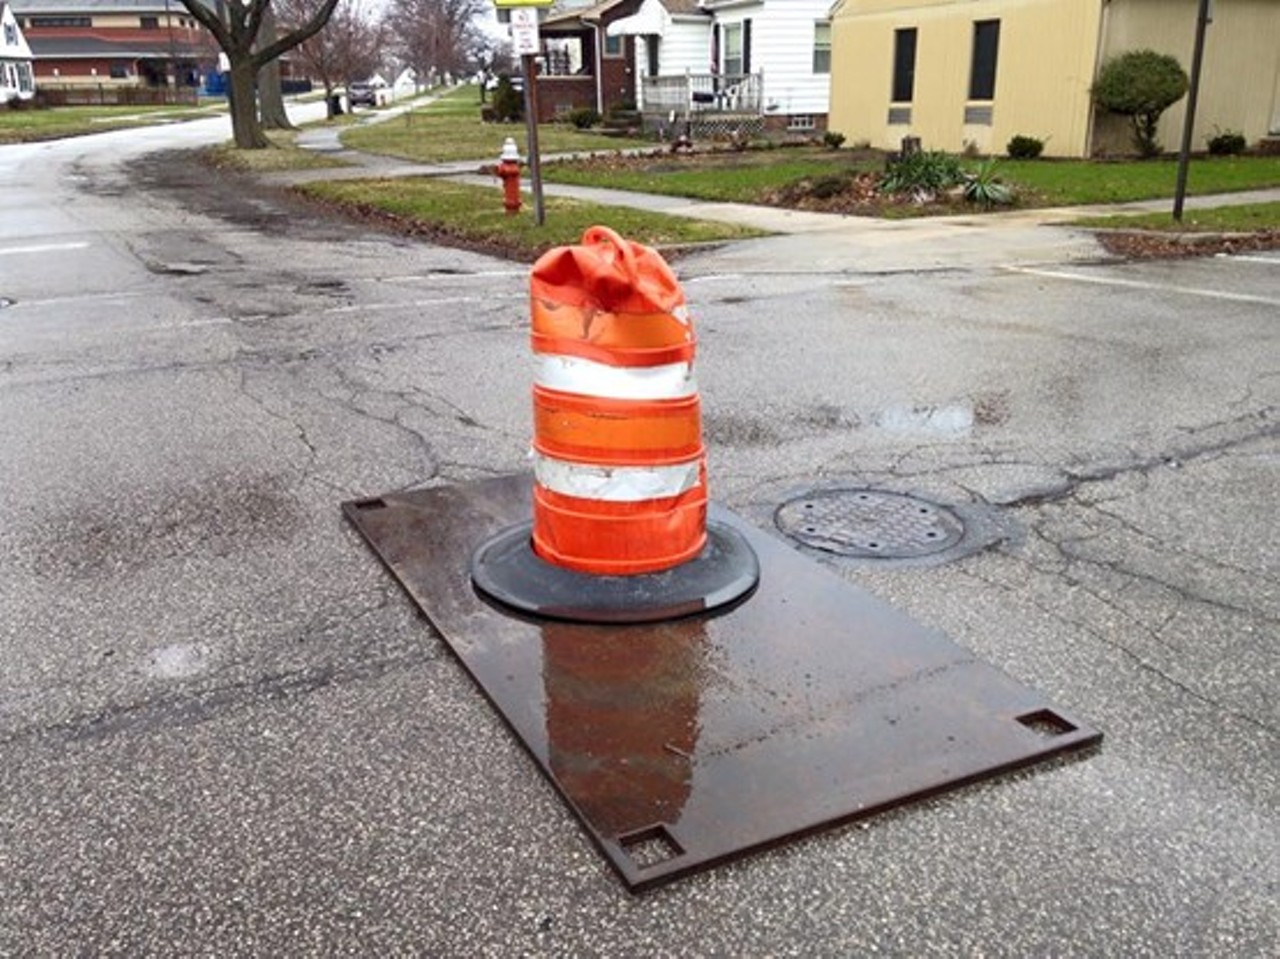 Traffic Cone
You could either be a traffic cone or a pot hole. You'll find many lookalikes on the streets of Cleveland either way.
Photo via Scene Archives